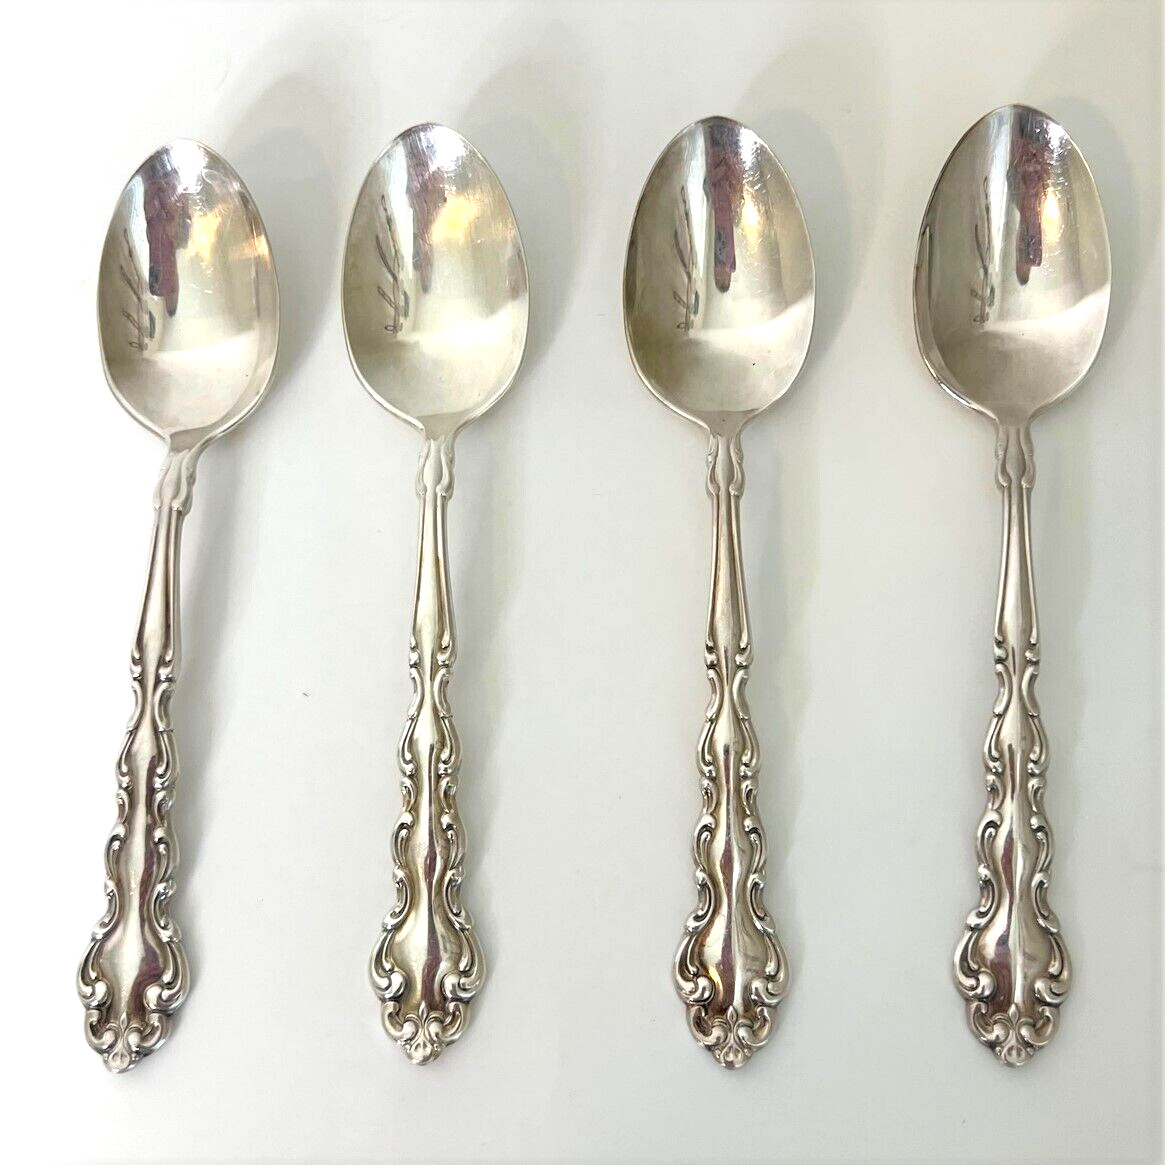 Oneida Community Silver Plated Modern Baroque Set of 4 Spoons